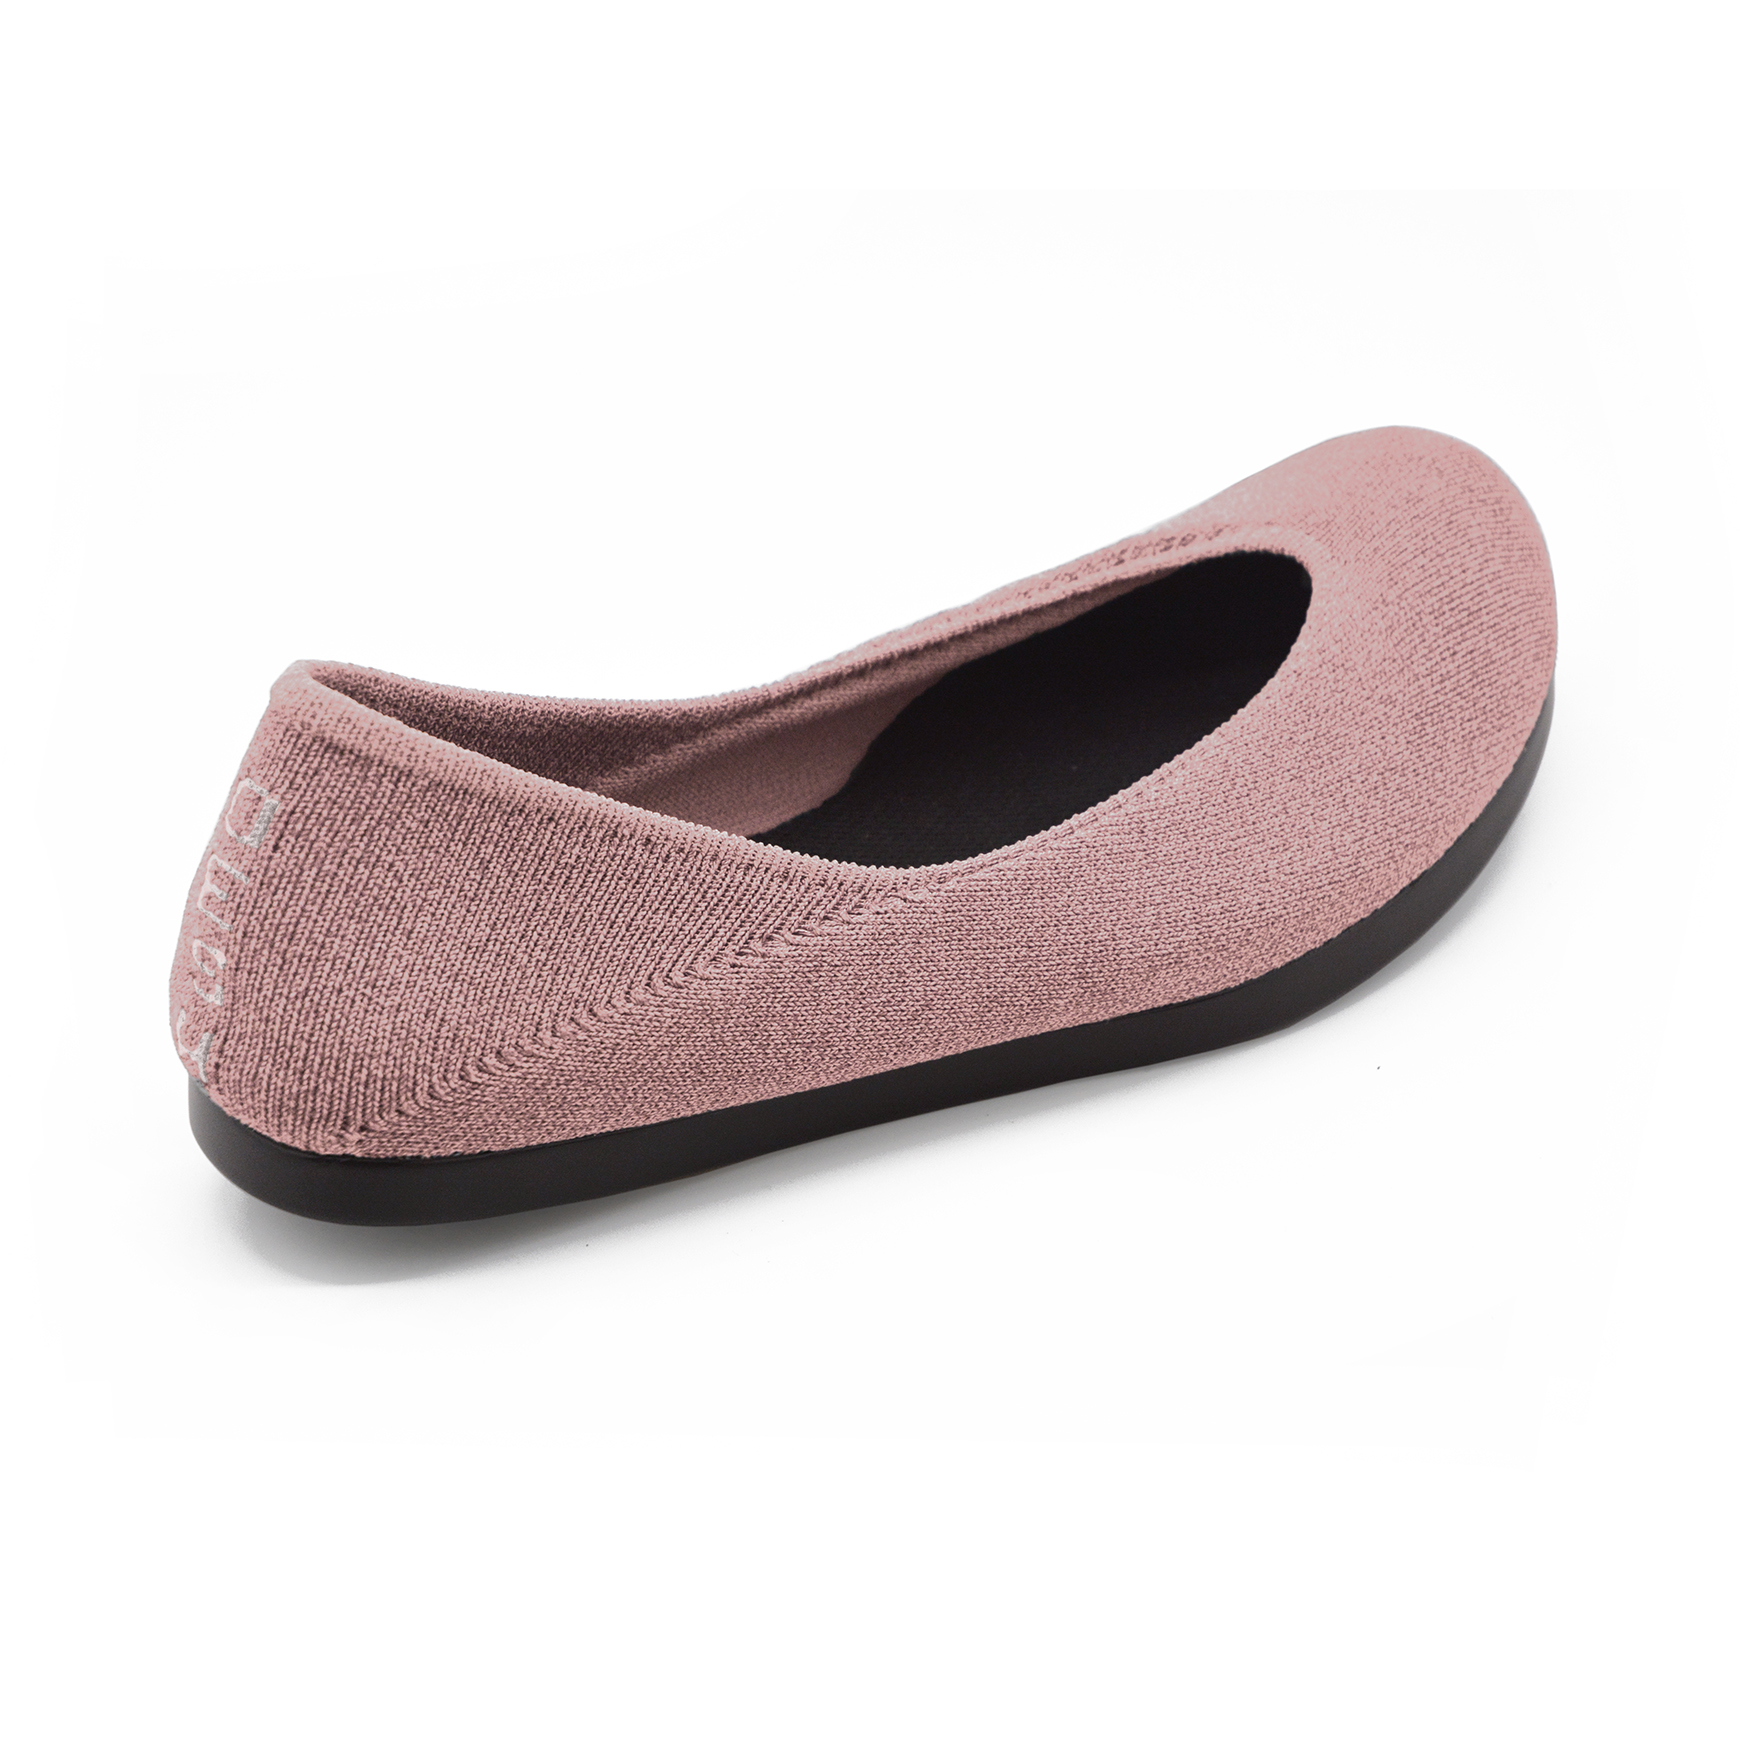 Dream Dogwood Blossom | OESH Shoes for women by women